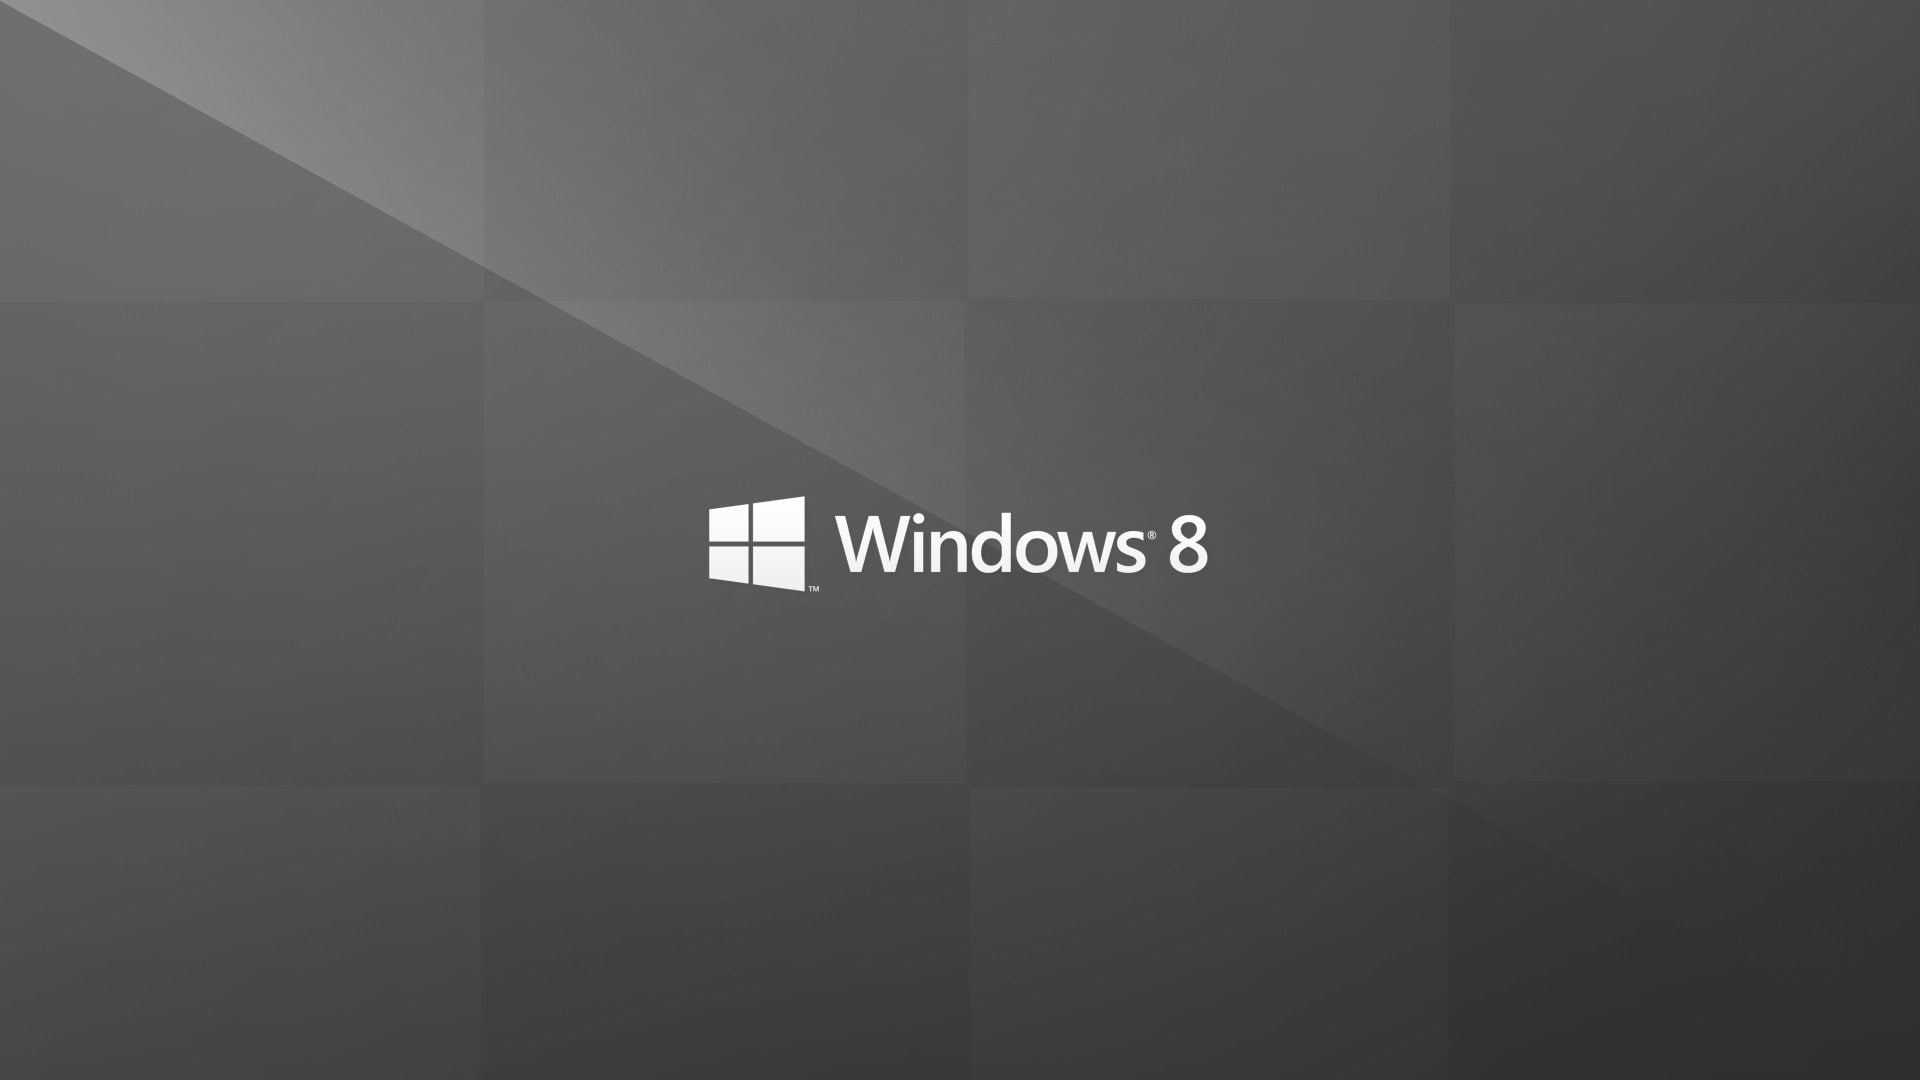 8, abstract, computers, grey, logo, microsoft, Operating, Systems